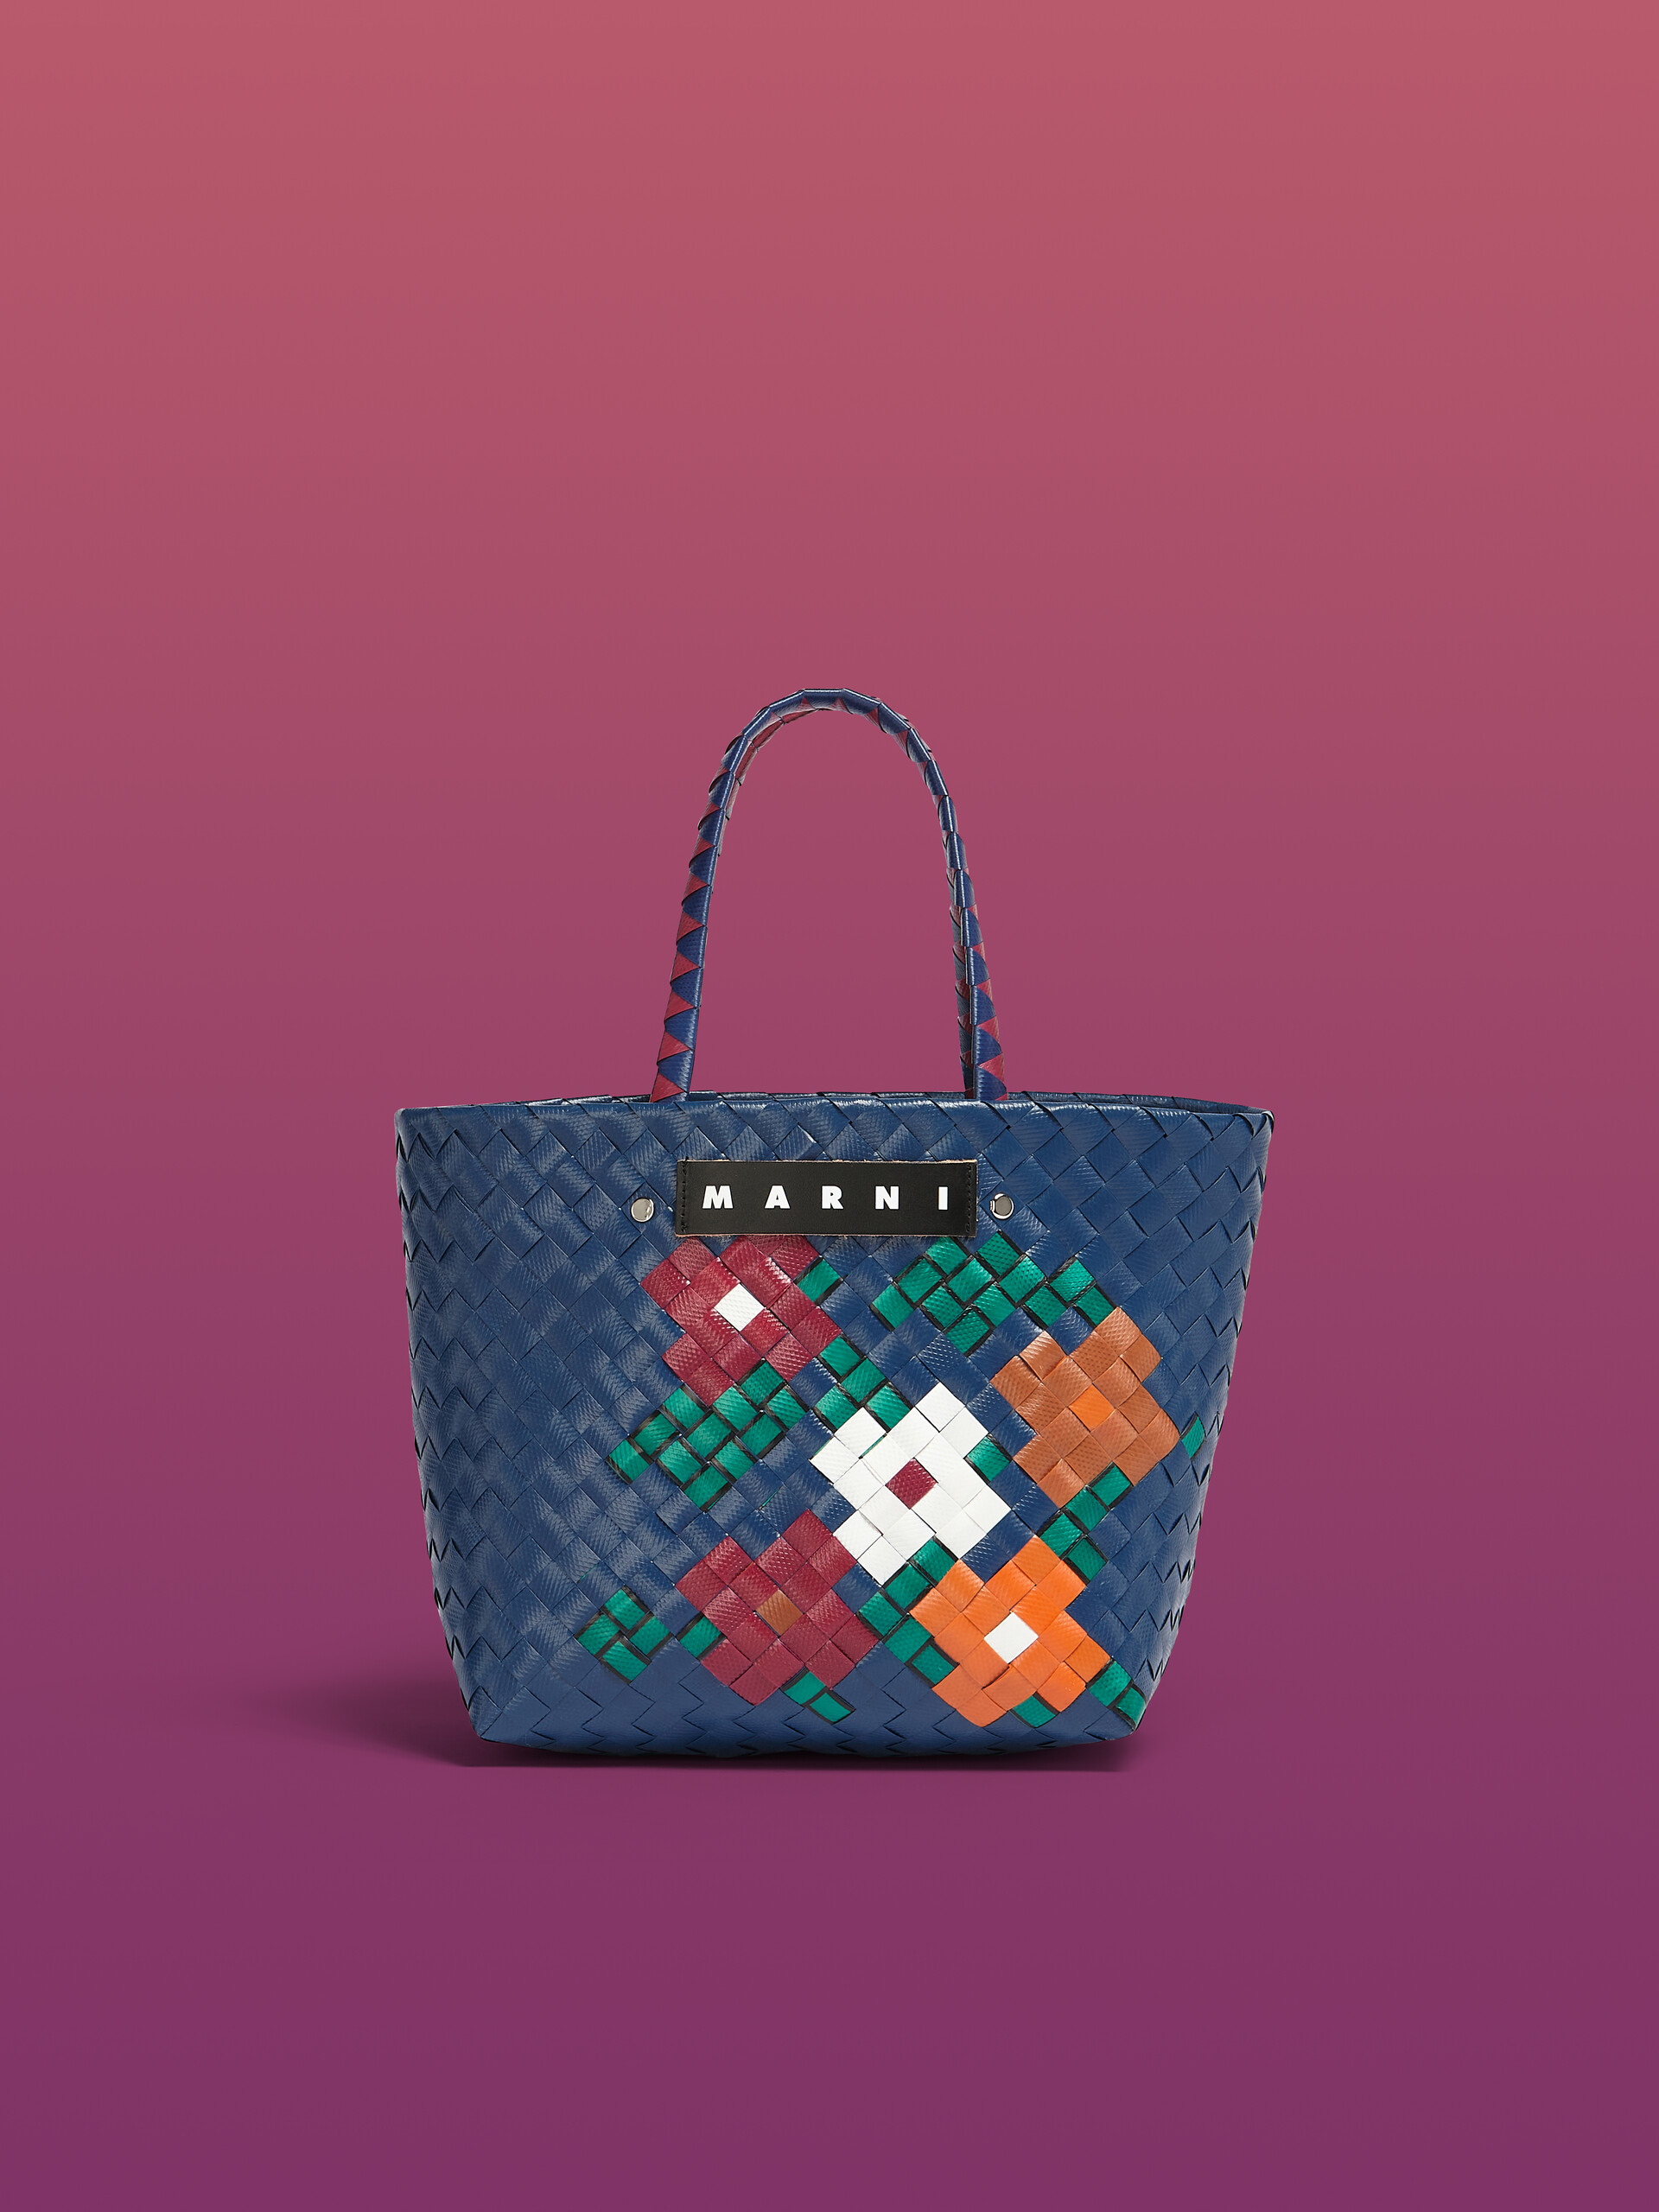 MARNI MARKET small bag in blue flower motif - Shopping Bags - Image 1